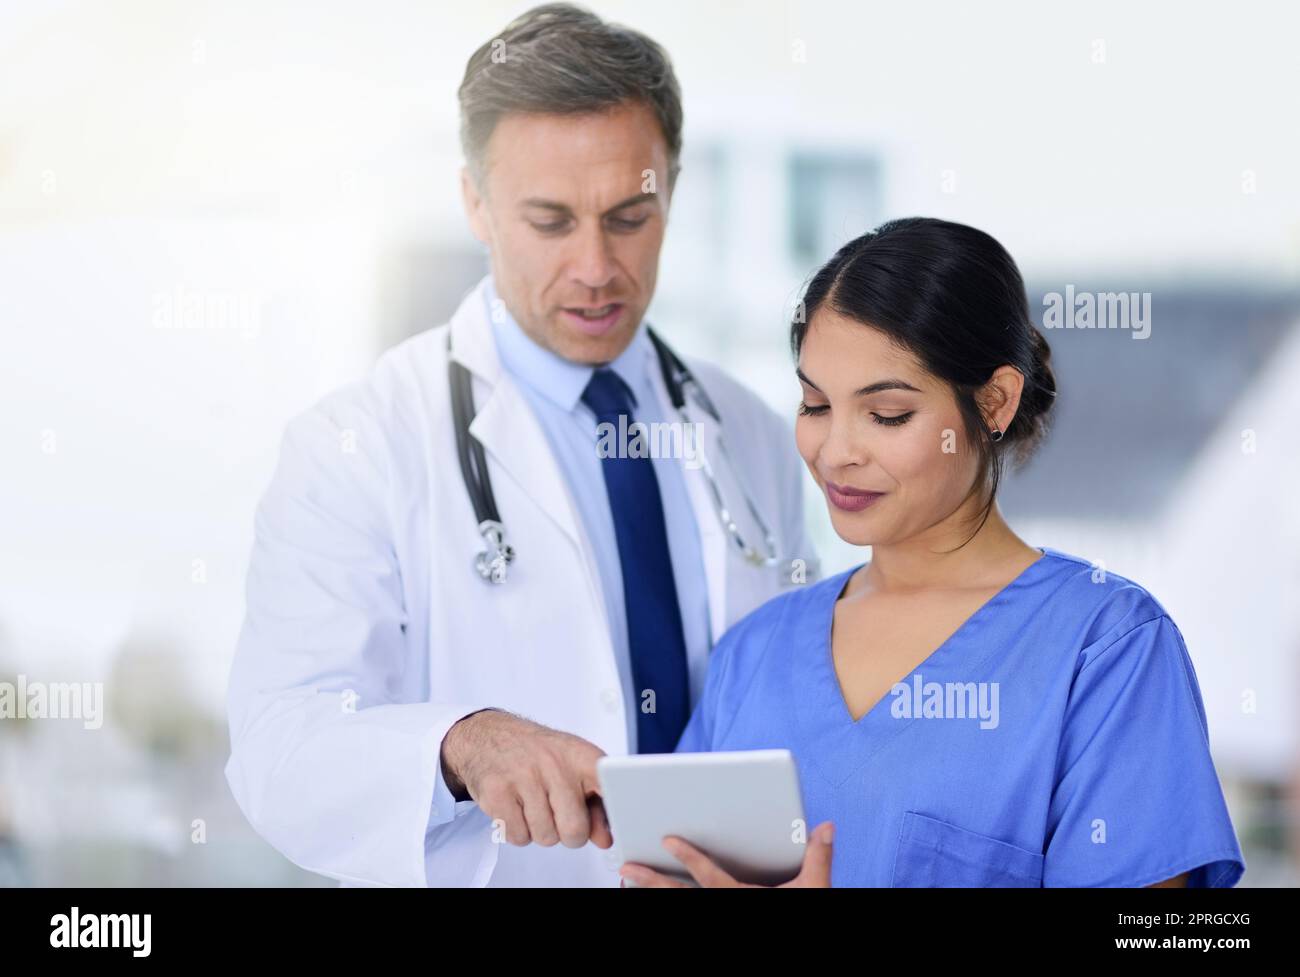 Deciding on the most effective treatment for their patient. medical practitioners looking at a patients file on a digital tablet. Stock Photo